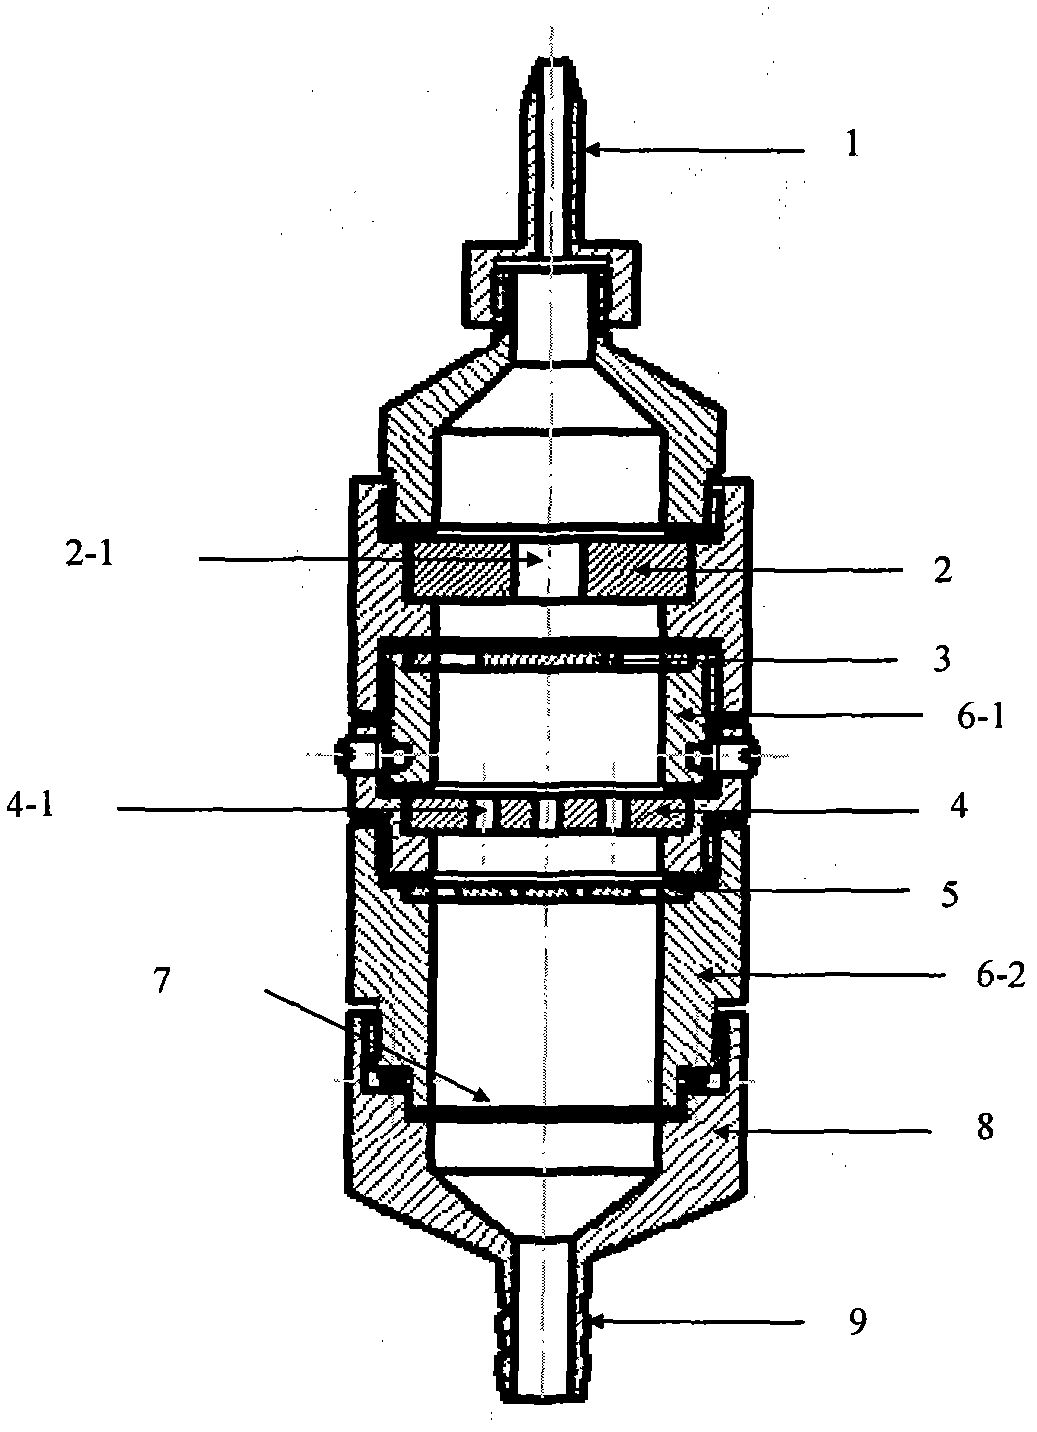 Radioactive aerosol particle recovery device